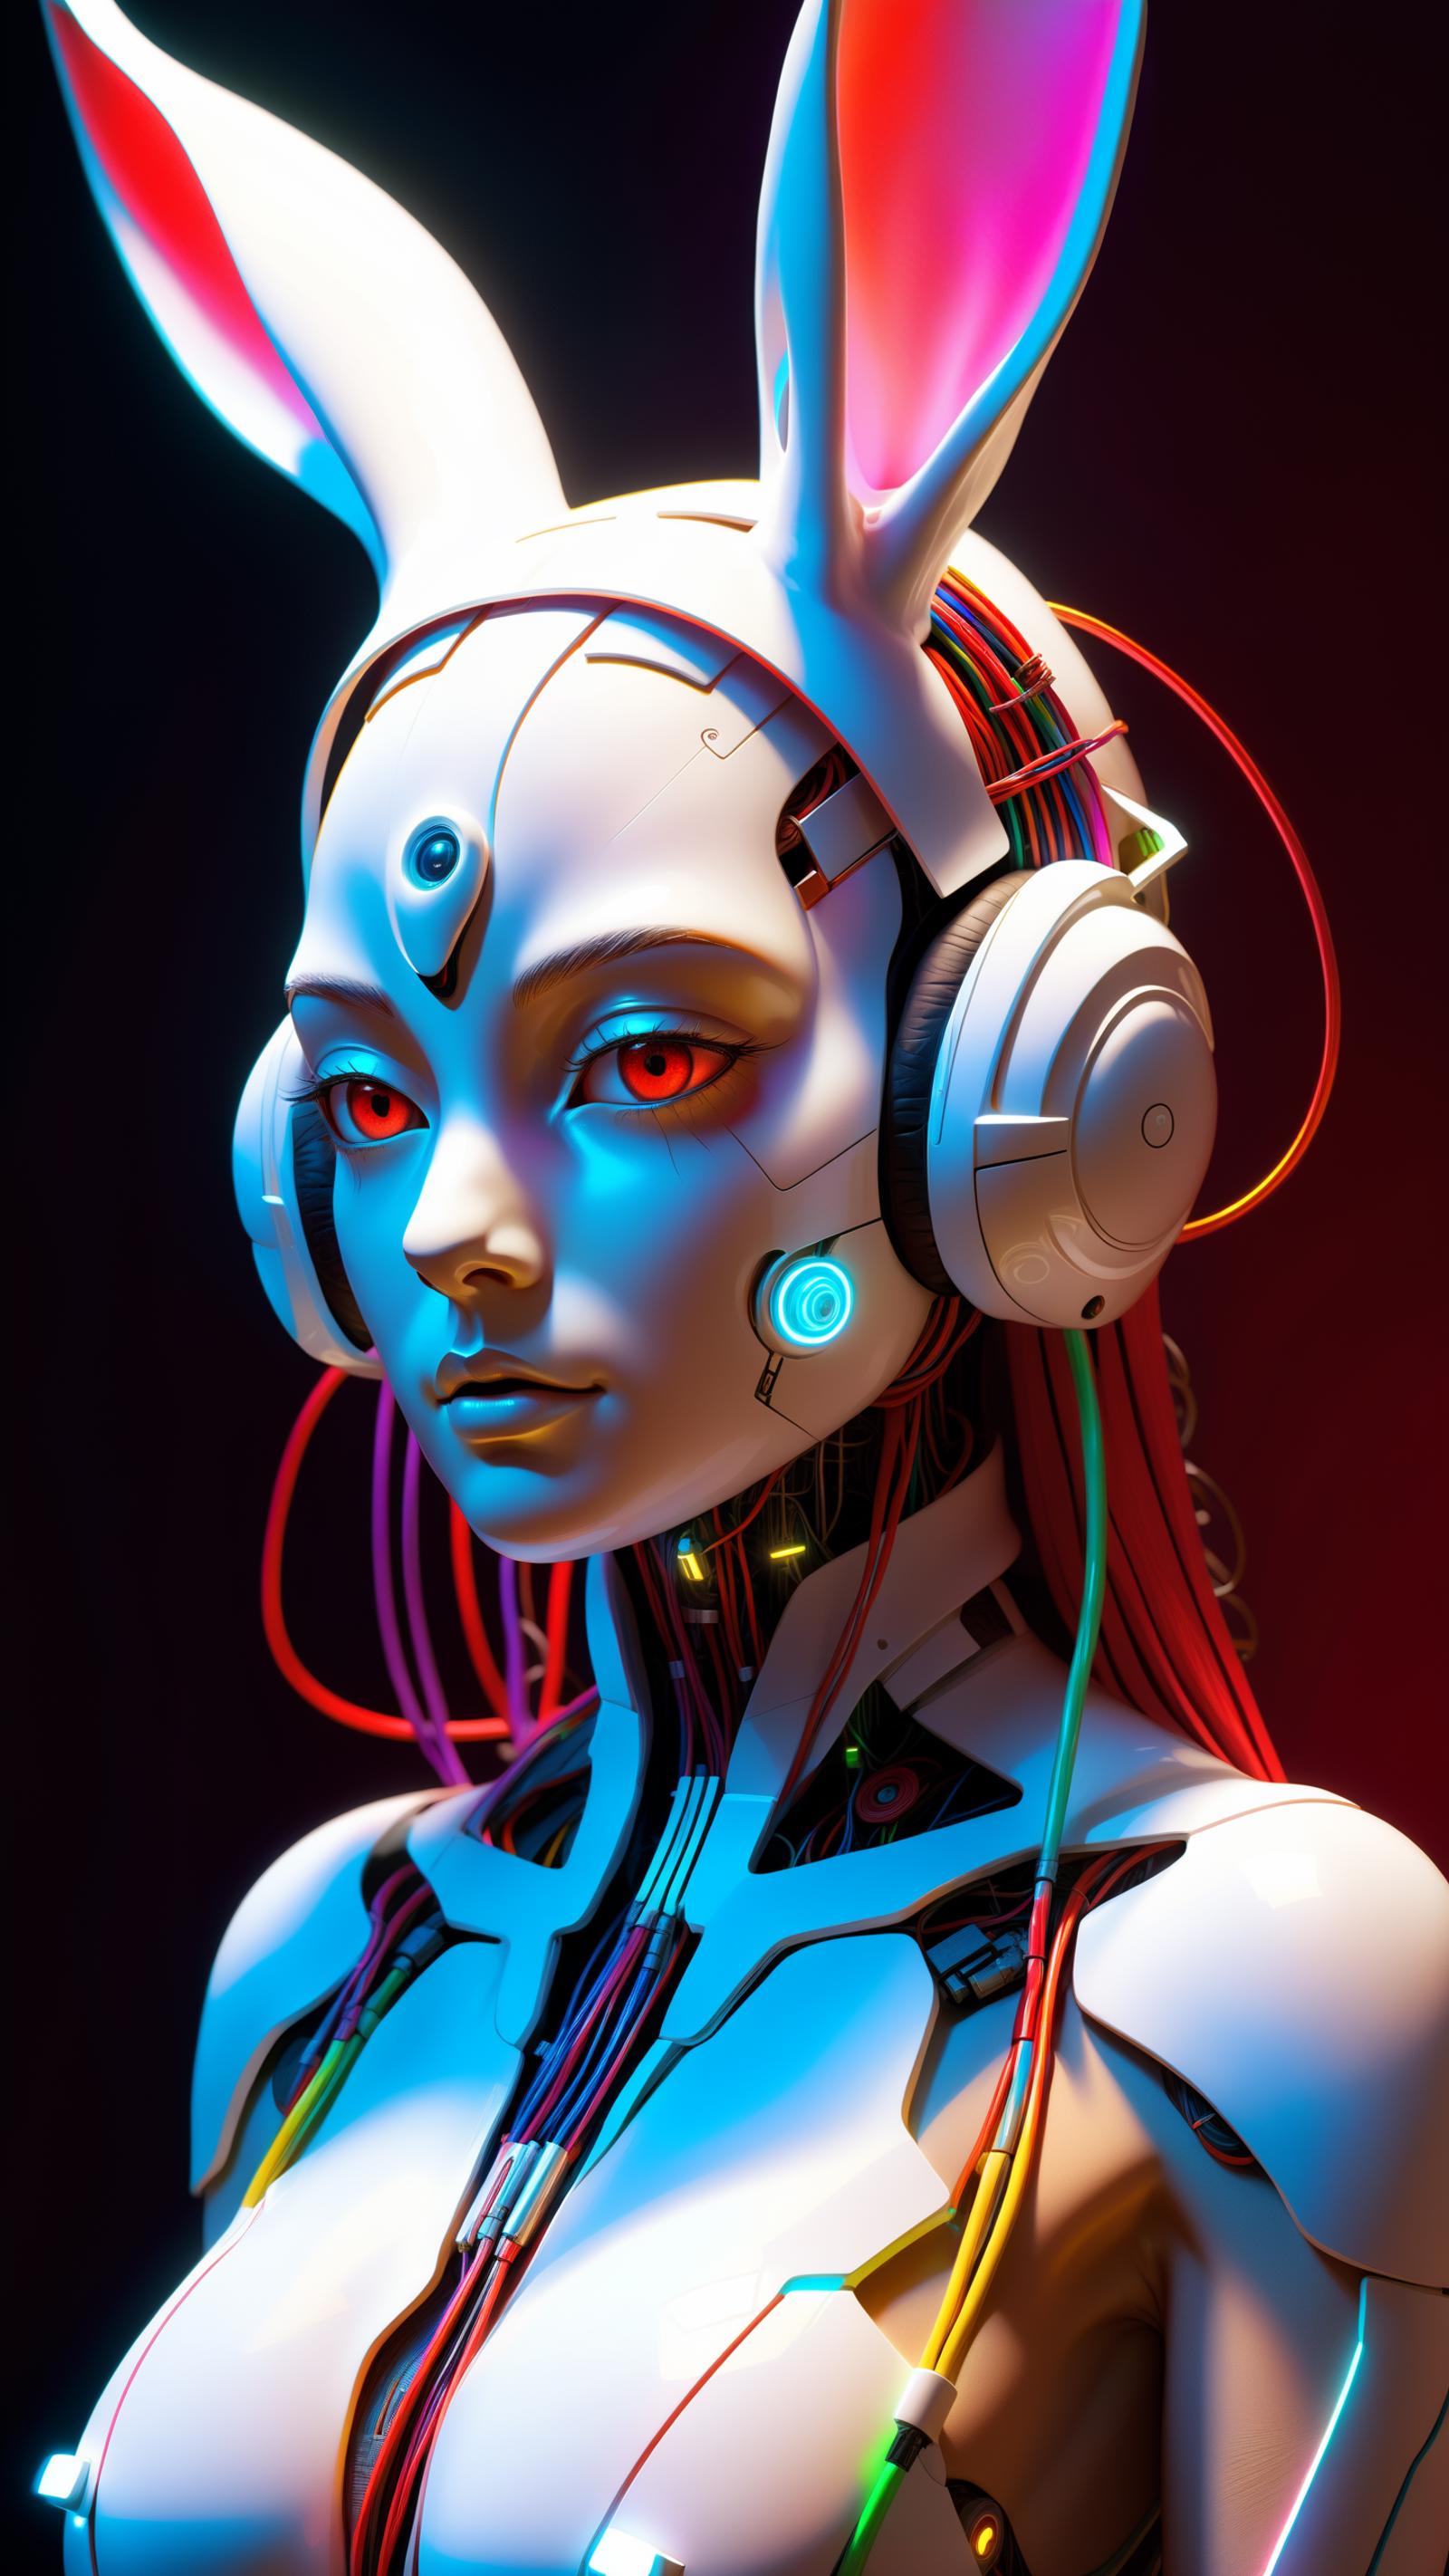 A woman with blue eyes and headphones on her ears.